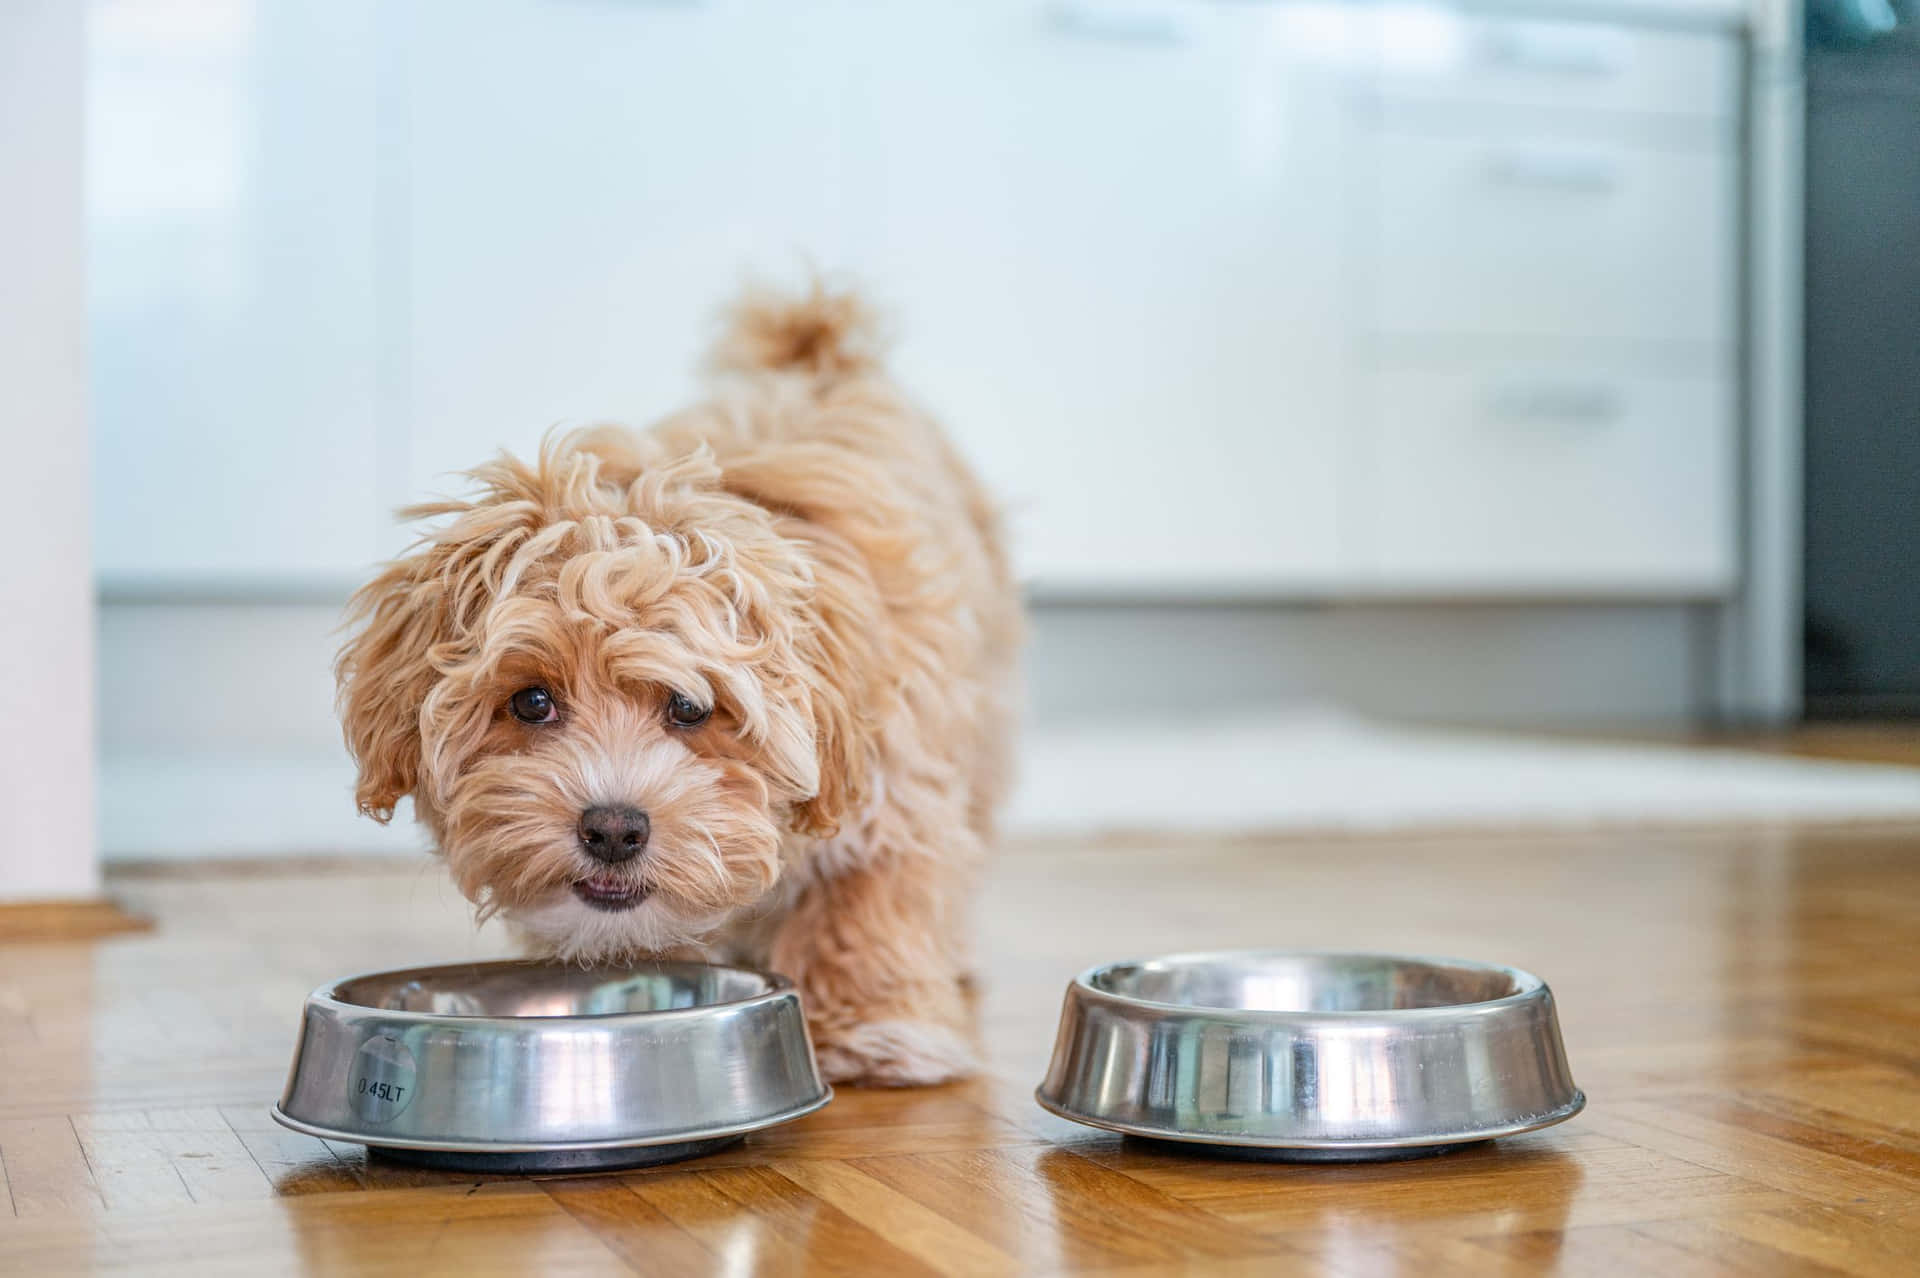 A Small Dog Standing Next To Two Metal Bowls